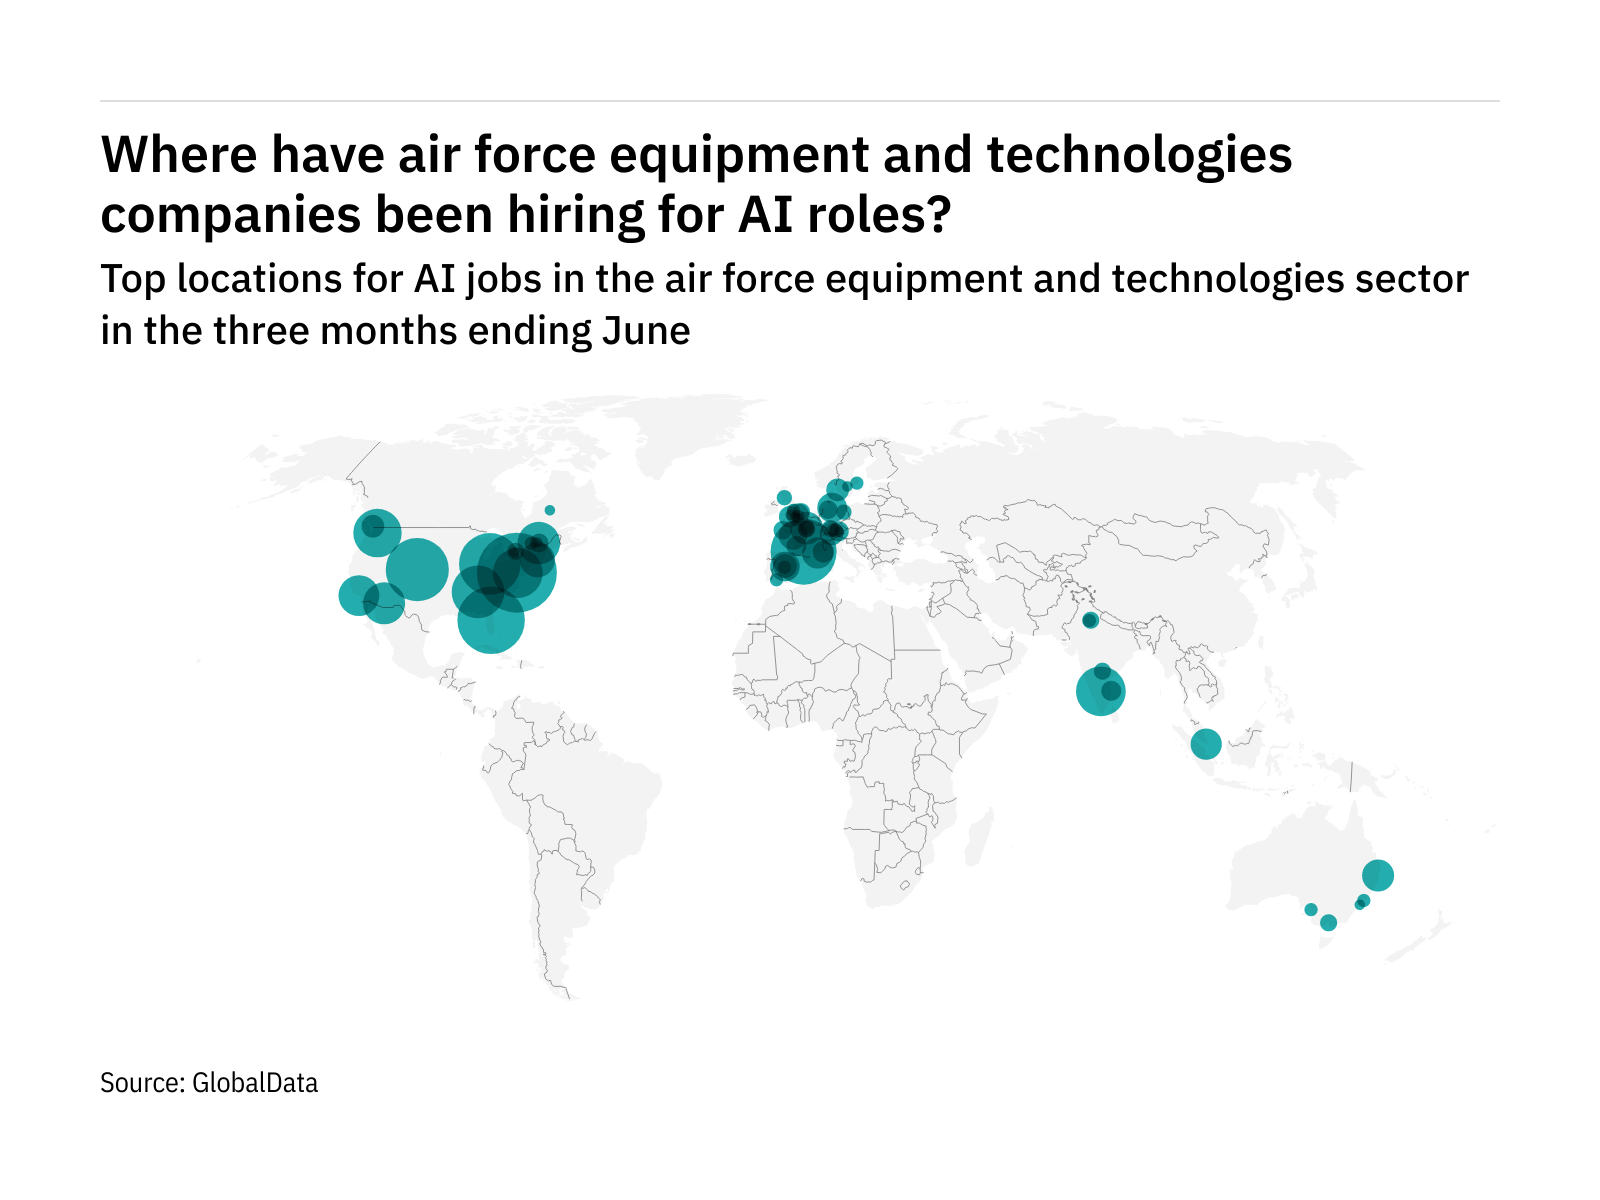 Europe is seeing a hiring boom in air force industry AI roles